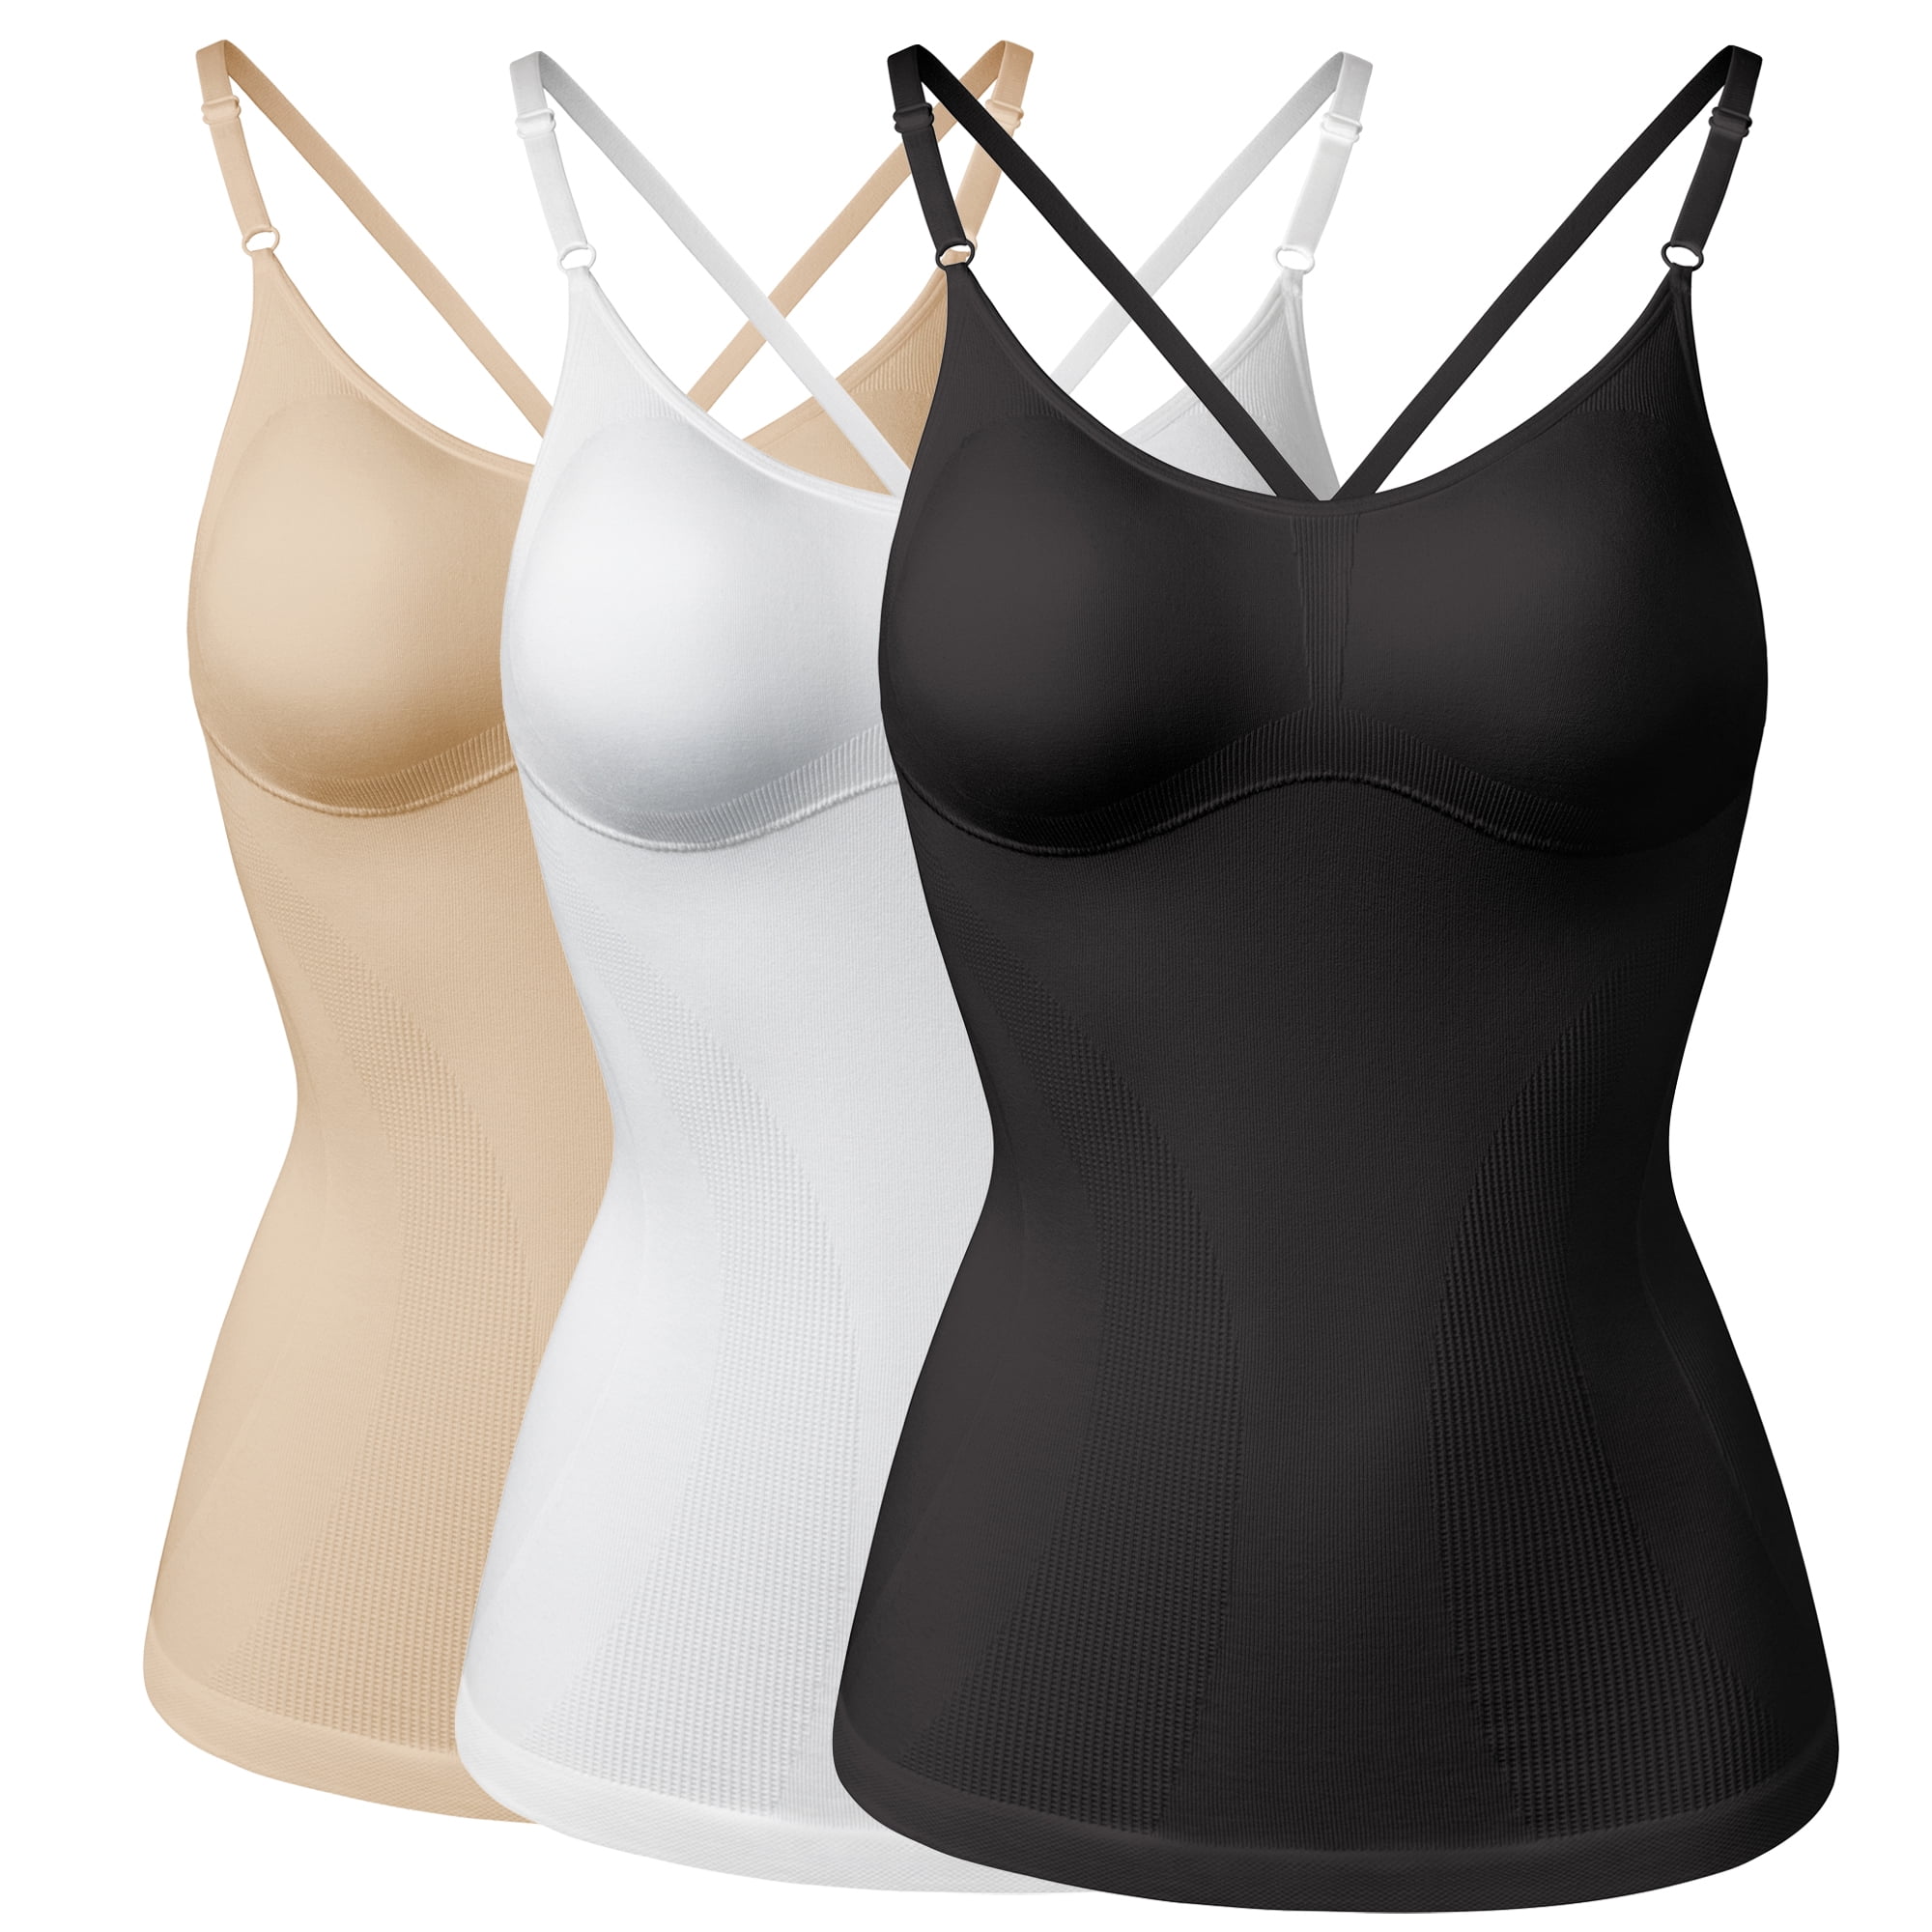 4 Shaping Camis Our Customers Can't Get Enough Of